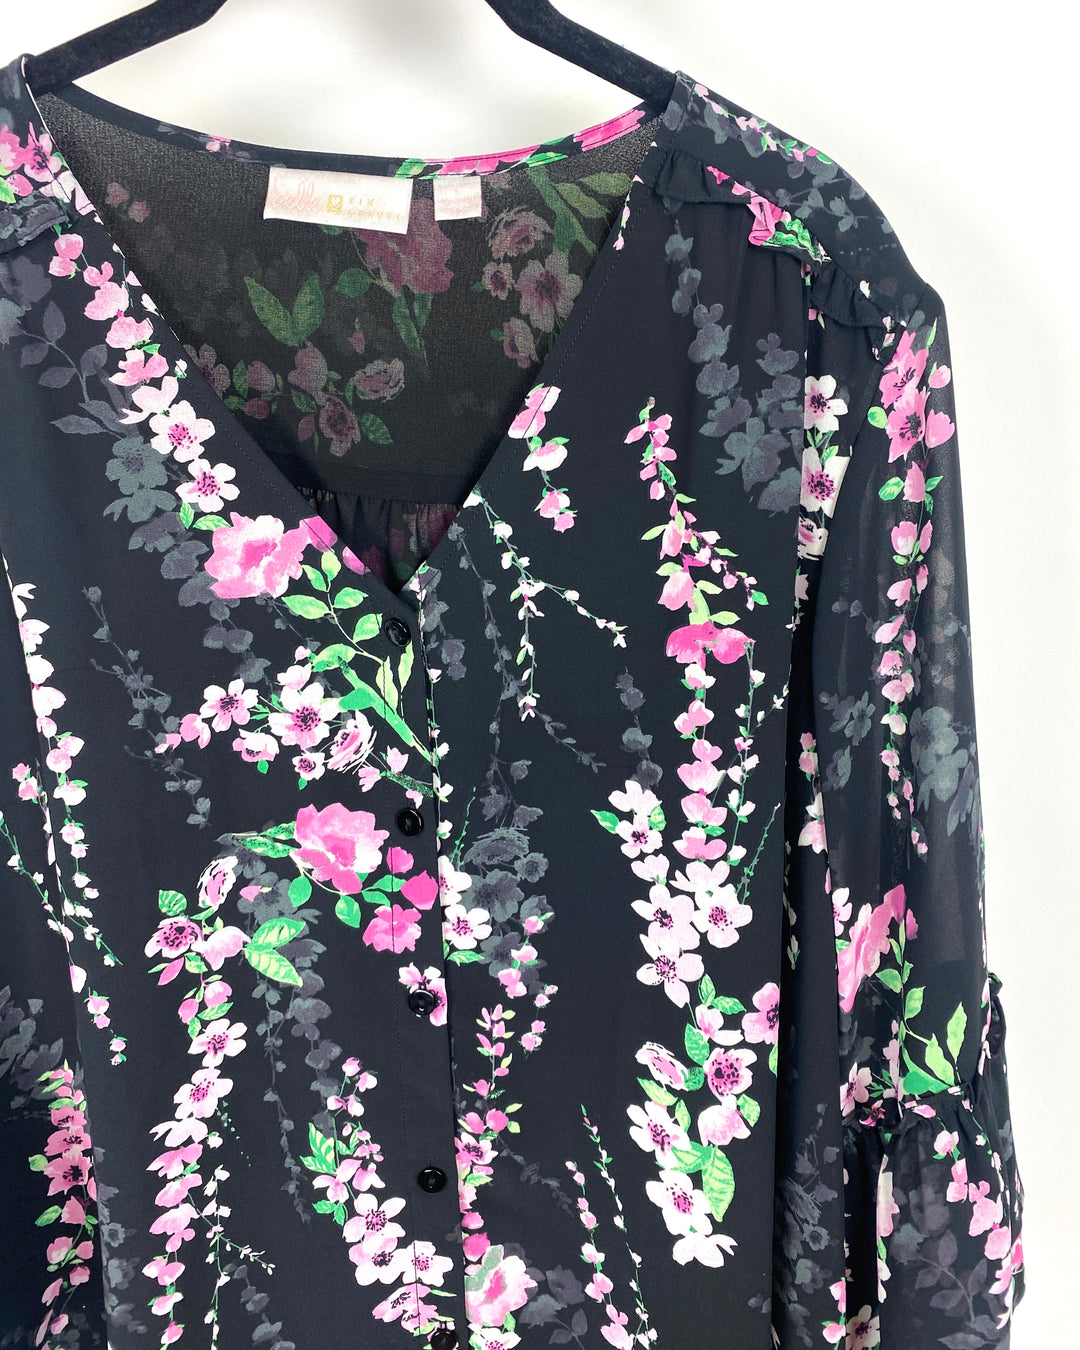 Colorful Floral Print Blouse - Large/Extra Large